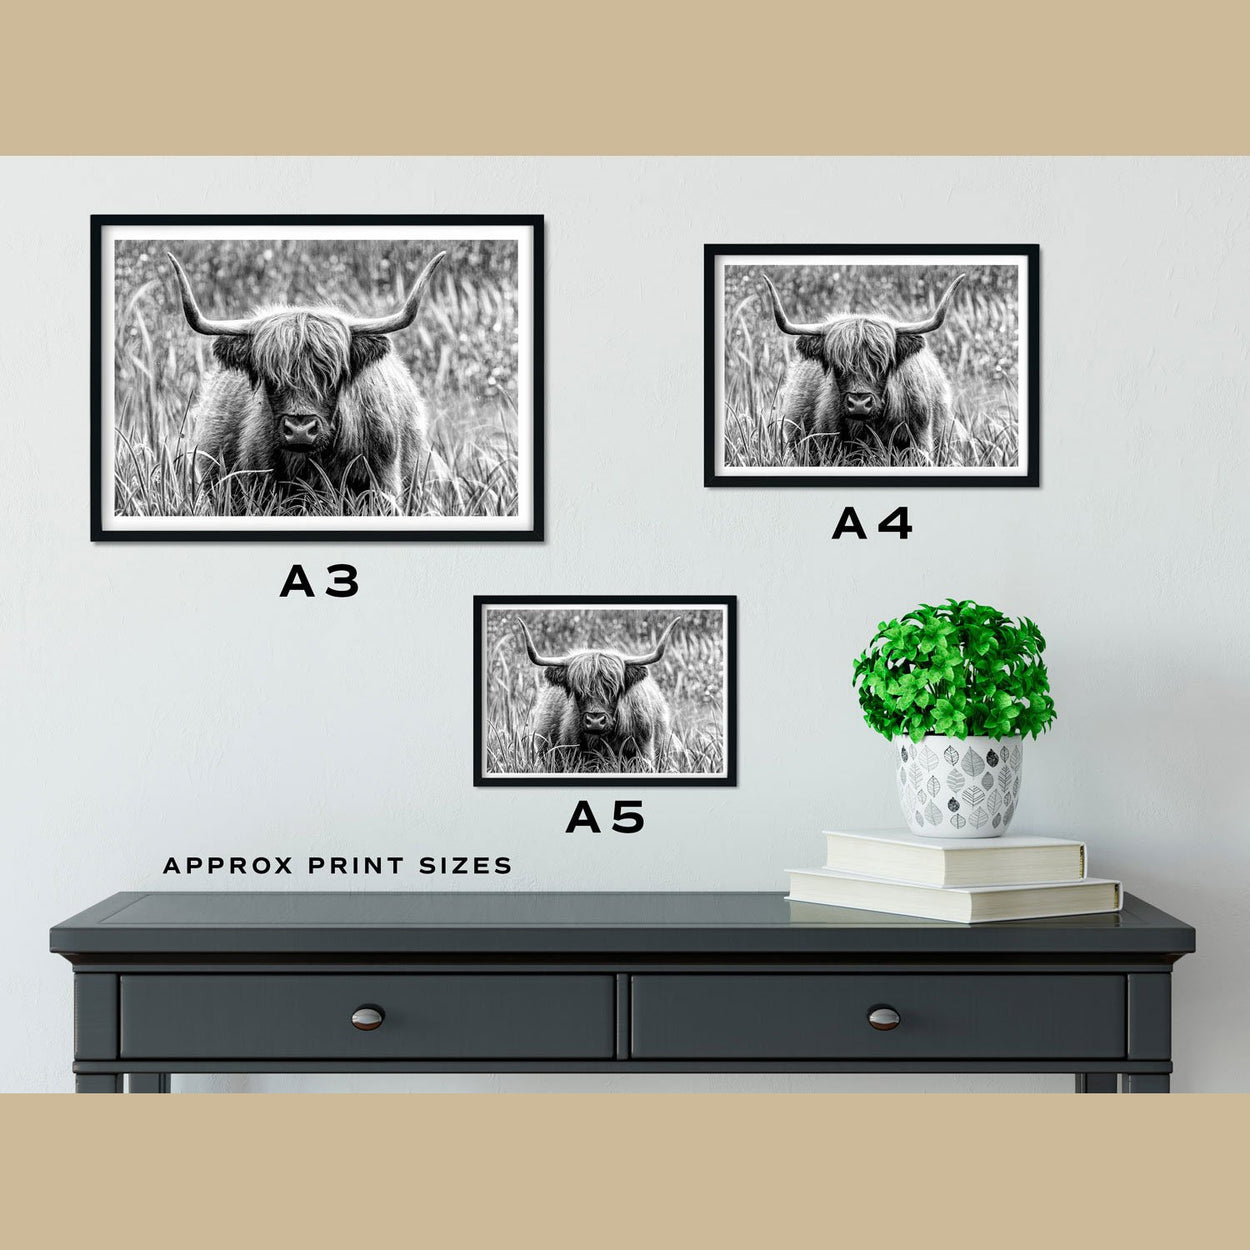 Highland Cow Prints Size Comparison - The Thriving Wild